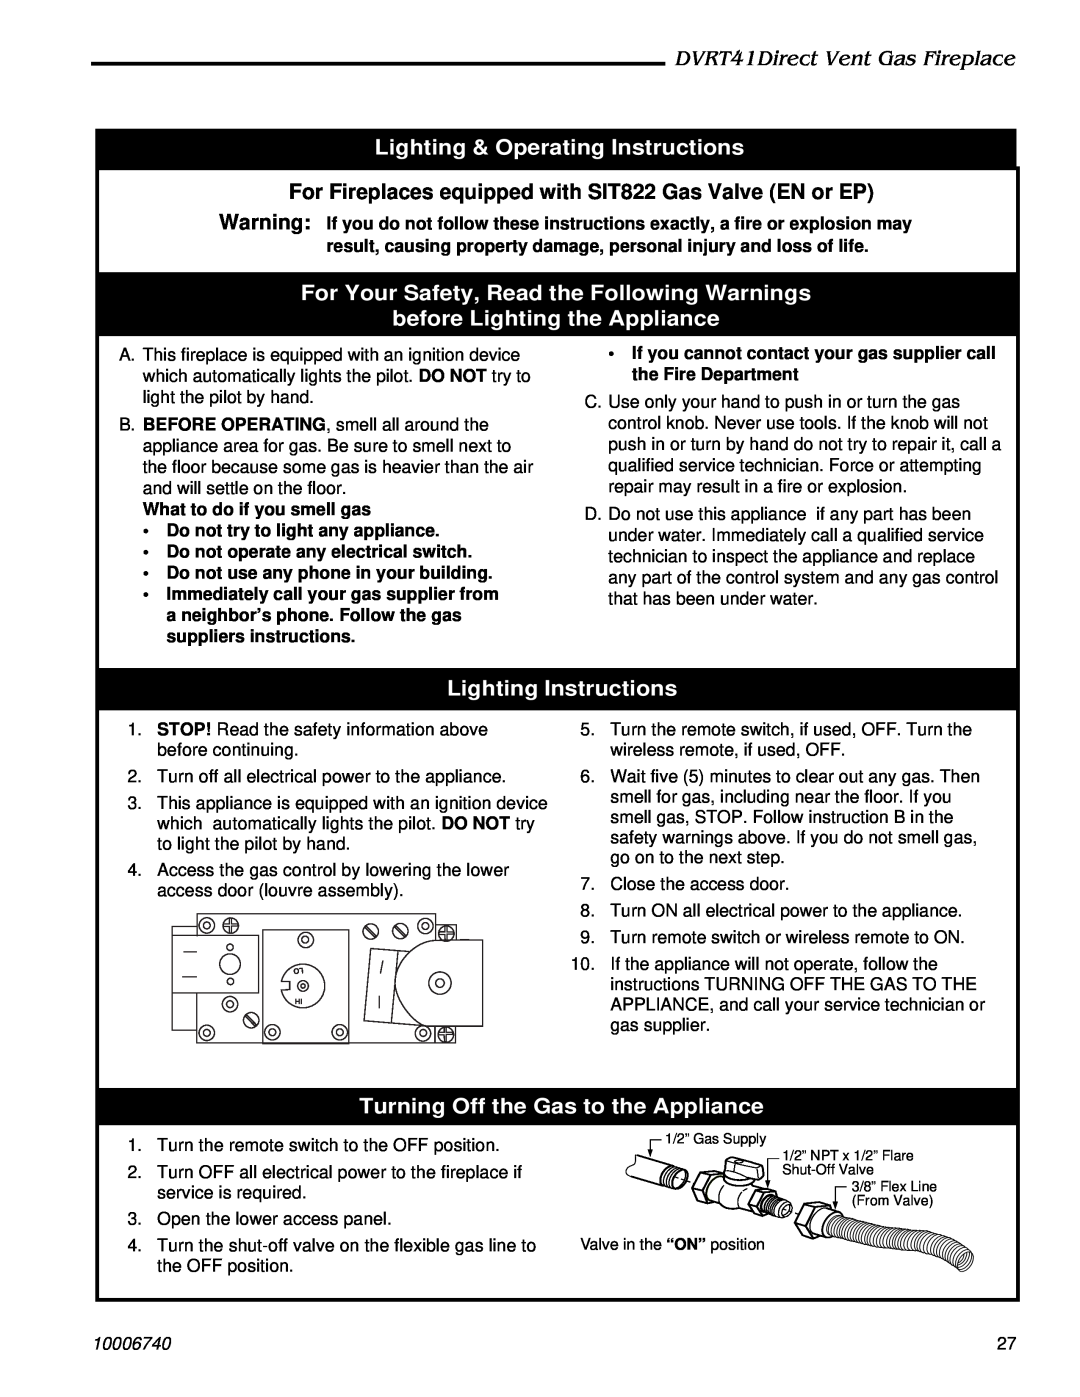 Vermont Casting DVRT41 manual Lighting & Operating Instructions, For Your Safety, Read the Following Warnings, 10006740 